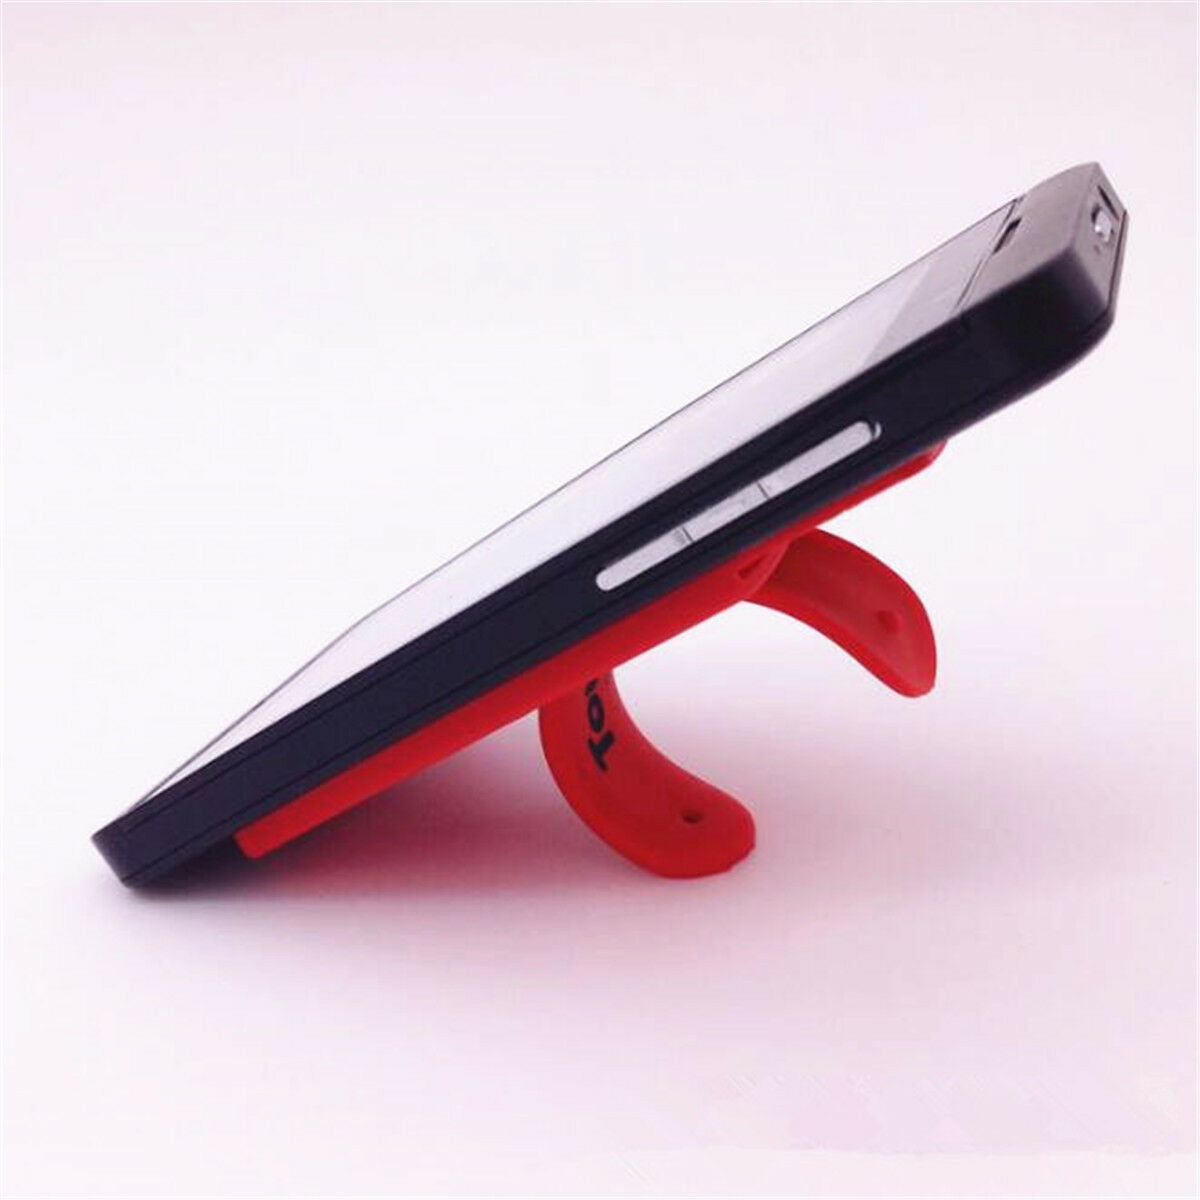 Useful Silicone Wallet Credit Card Stick on Adhesive Holder Pouch Case For Phone